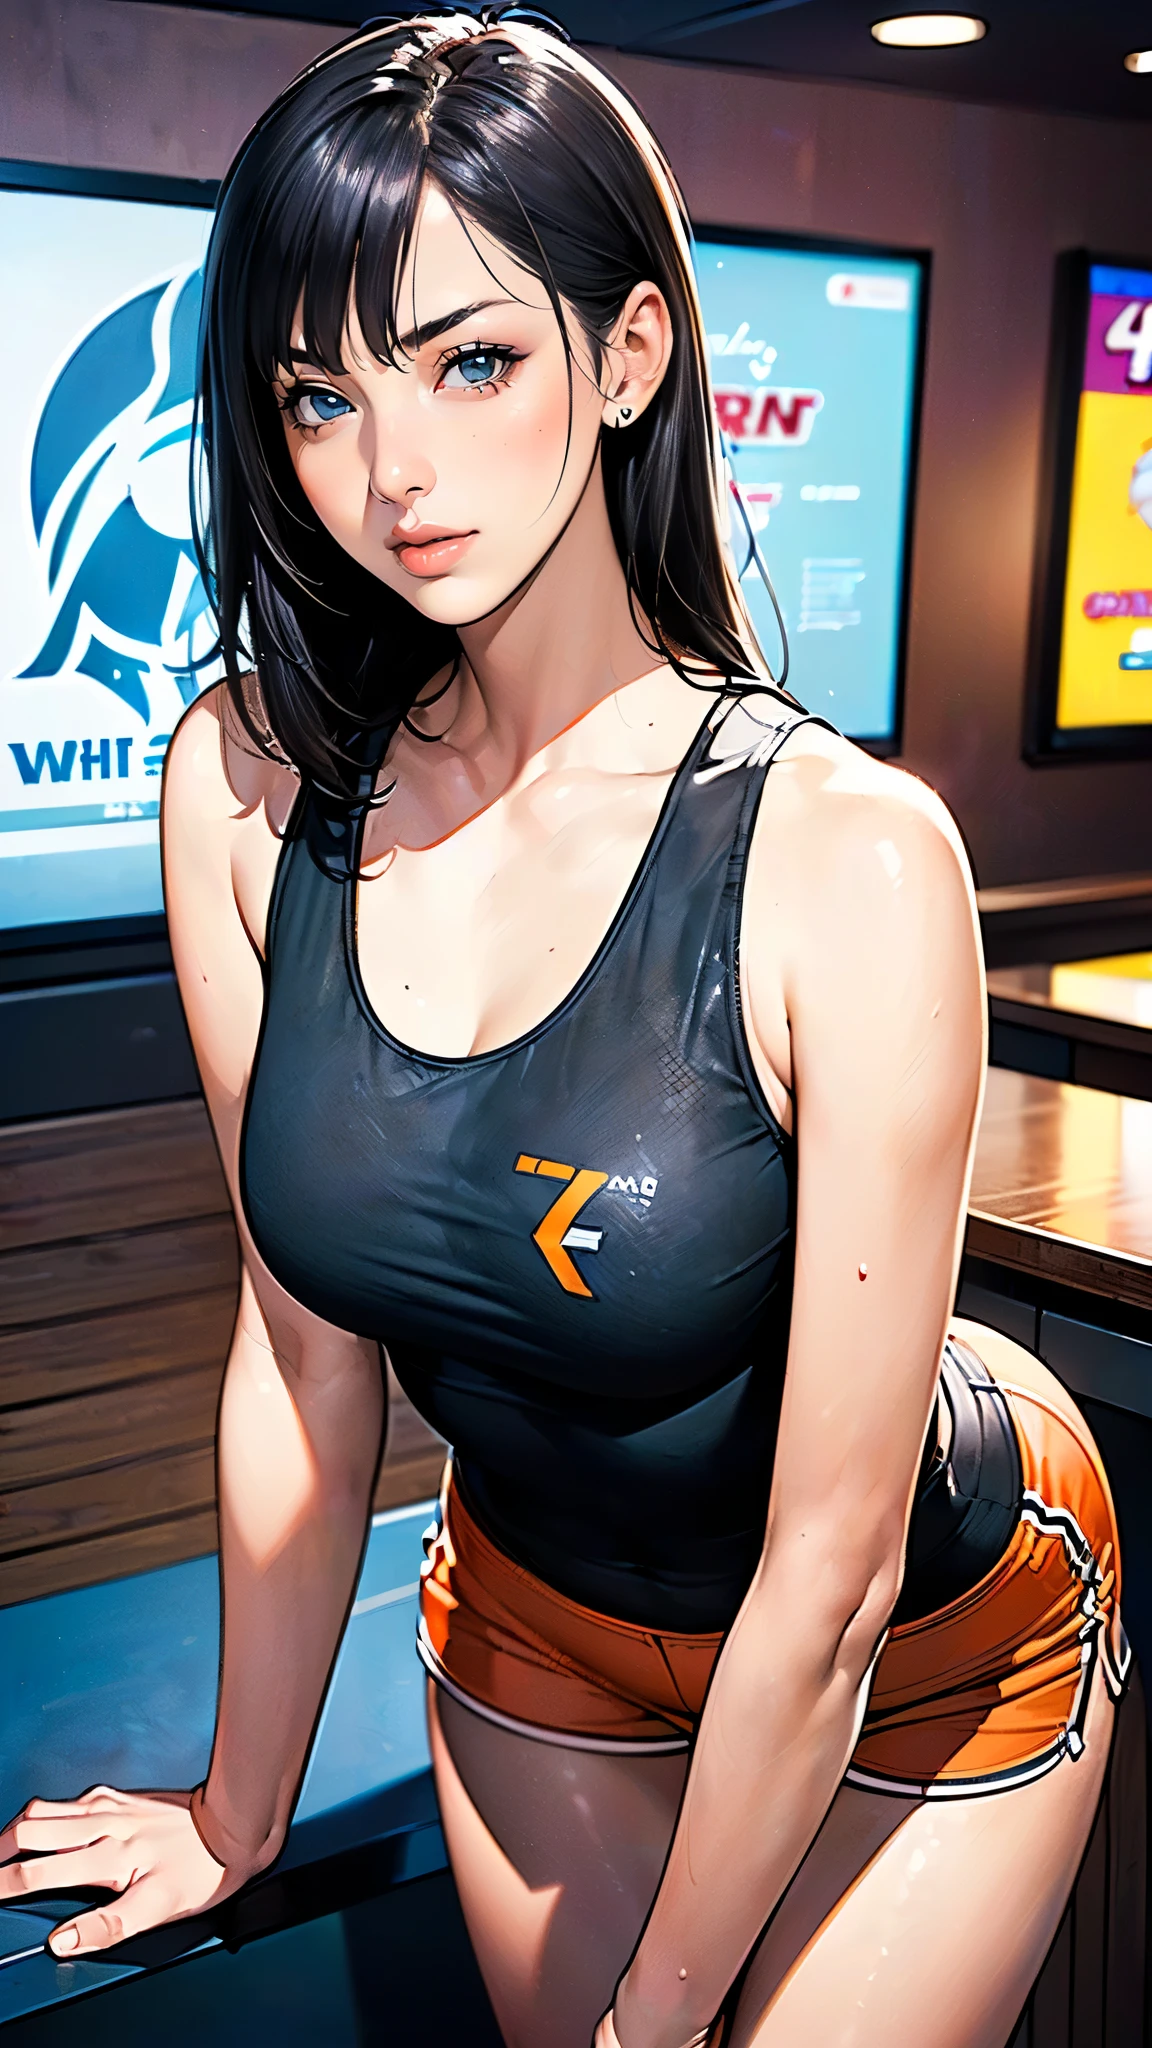 masterpiece,highest quality,Very detailed,High resolution,8k,wallpaper,Perfect lighting,BREAK(One Woman),(Mature woman working as a waiter at a sports bar:1.5),(48 years old),(hooters),(((A very form fitting white tank top:1.5))),((The tank top has the logo of a sports bar on it.:1.5)),(((tiny orange shorts))),(((Very detailed costume drawings:1.5))),(Beautiful Eyes:1.5),(Detailed face drawing:1.5),(Detailed face drawing:1.5),((Very detailed female hand:1.5)),(Shiny skin:1.2),(Big Breasts:1.2),(Thick thighs:1.5),(Sensual body:1.5),(Sports bar background:1.5),(((Blur the background:1.5))),(((I&#39;m embarrassed:1.5)))